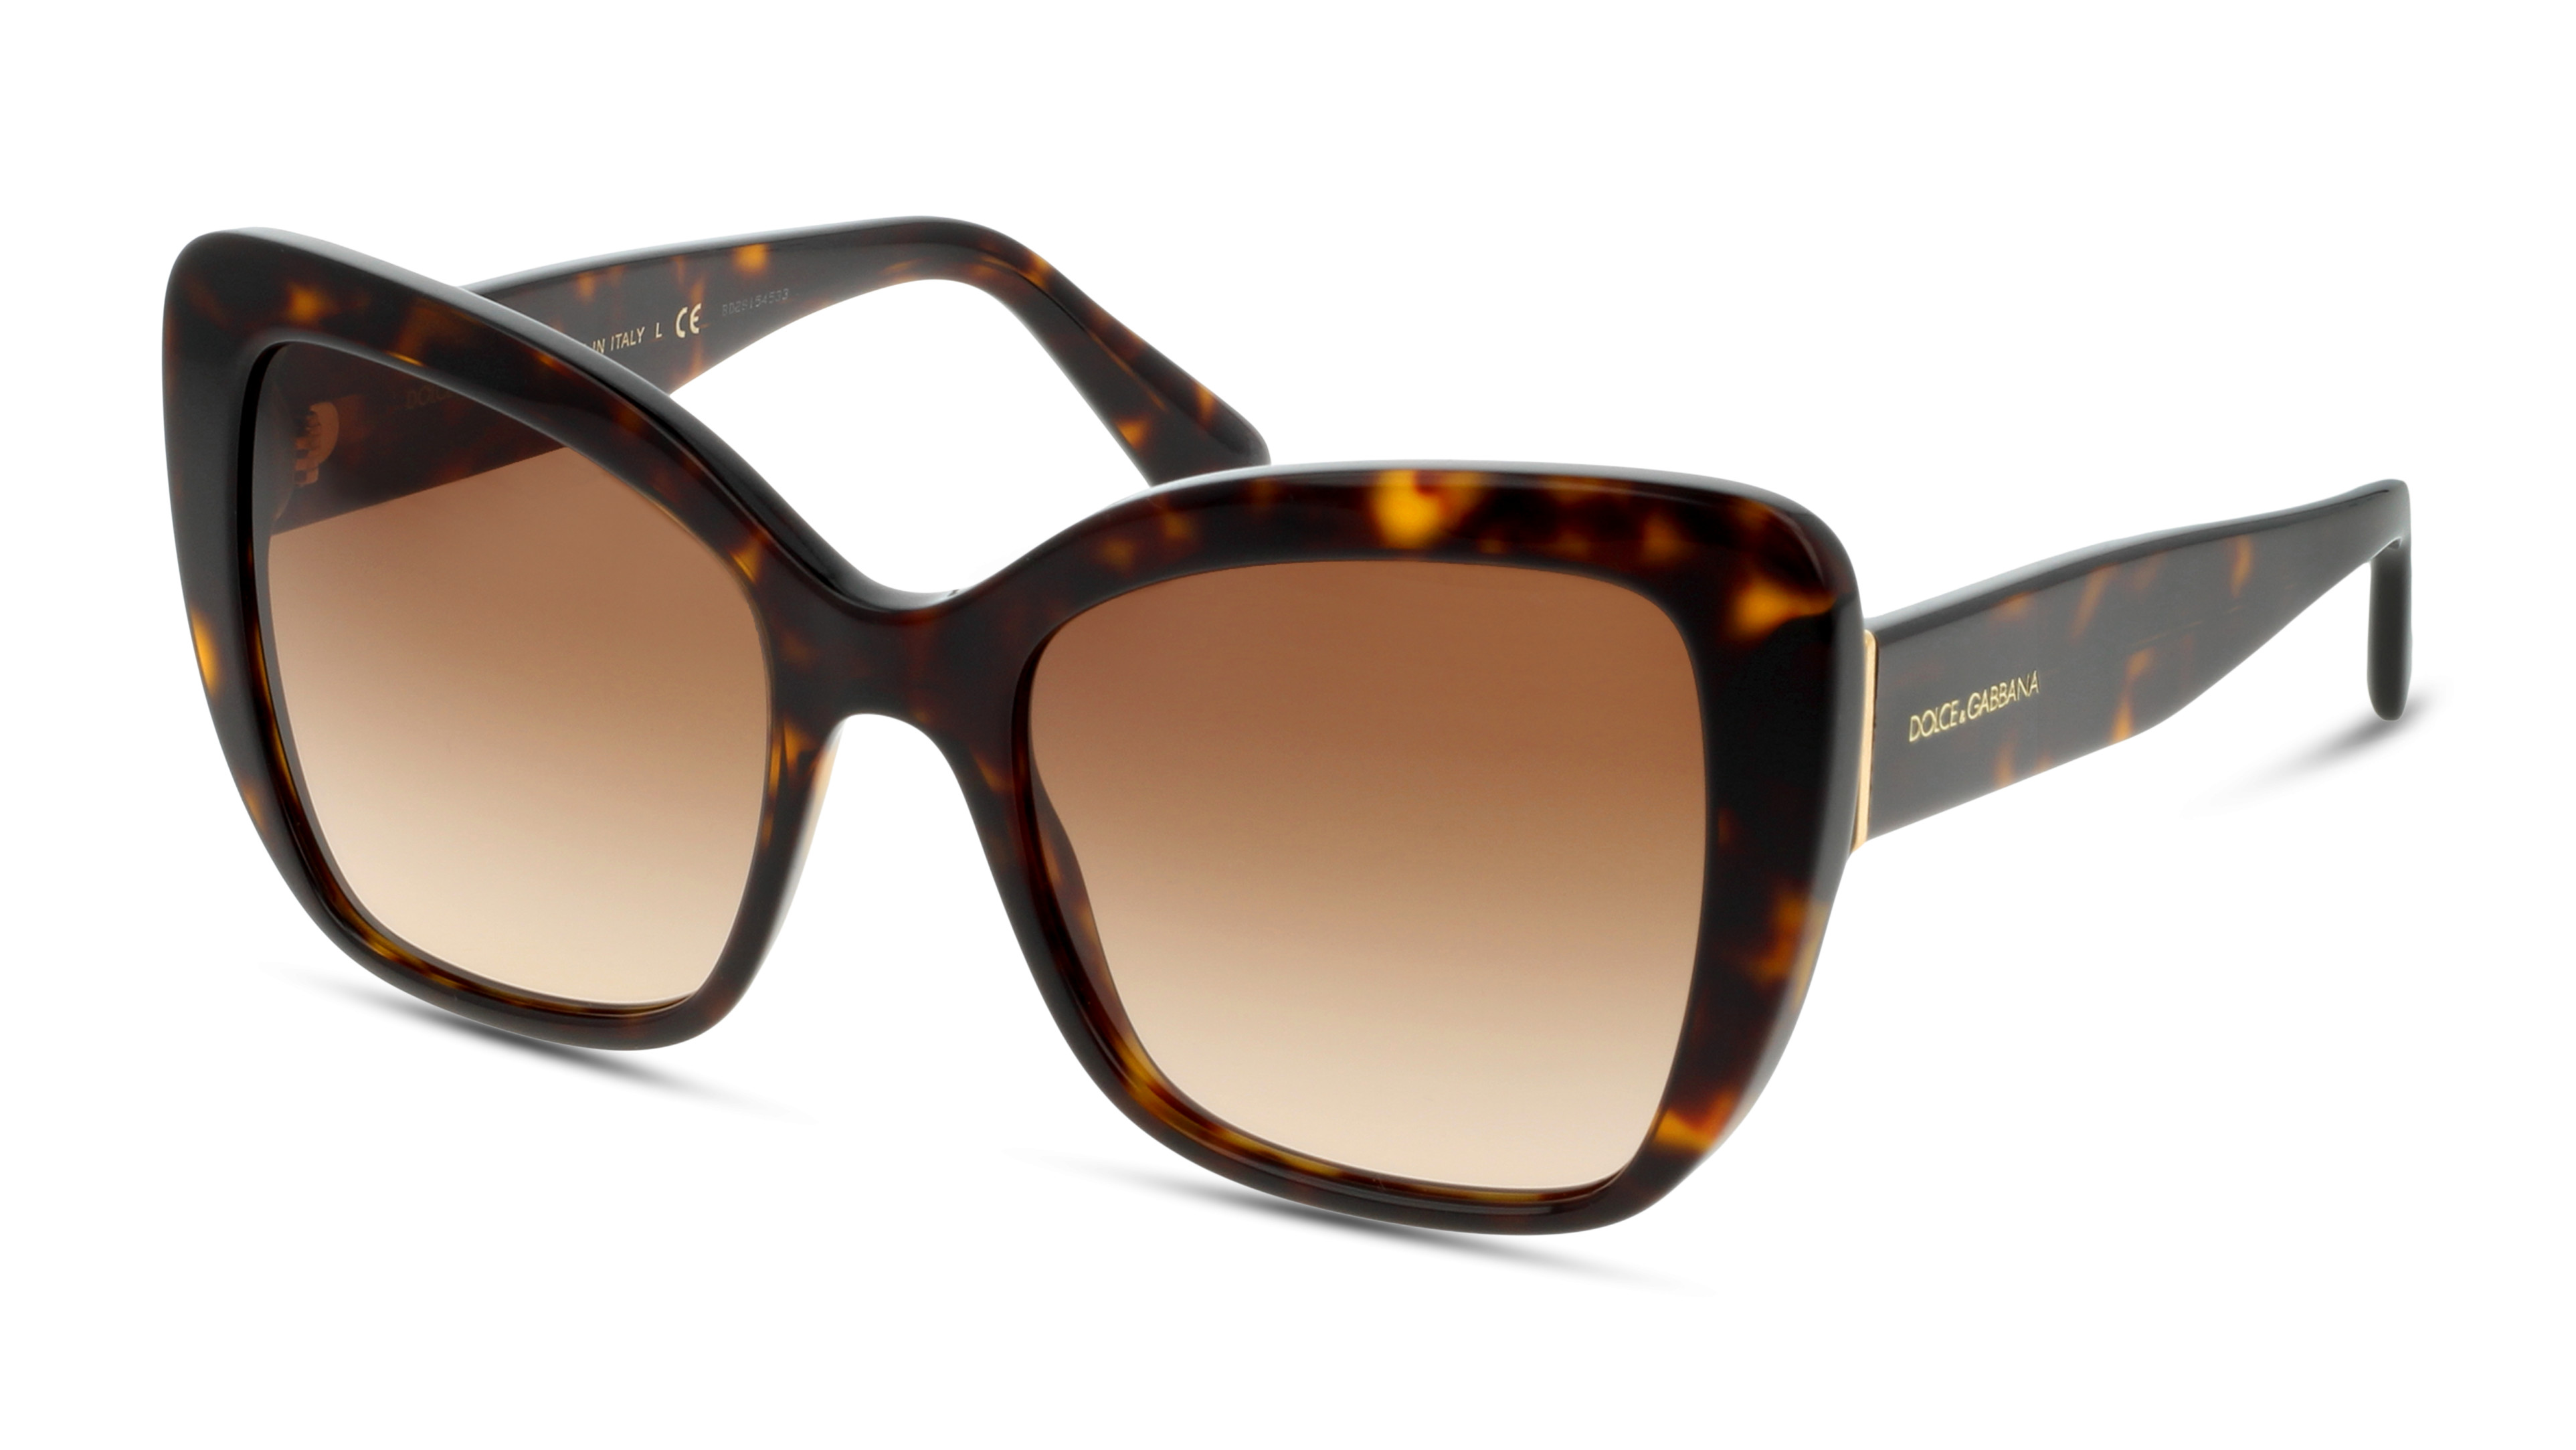 [products.image.angle_left01] Dolce&Gabbana Print Family 0DG4348 502/13 Sonnenbrille